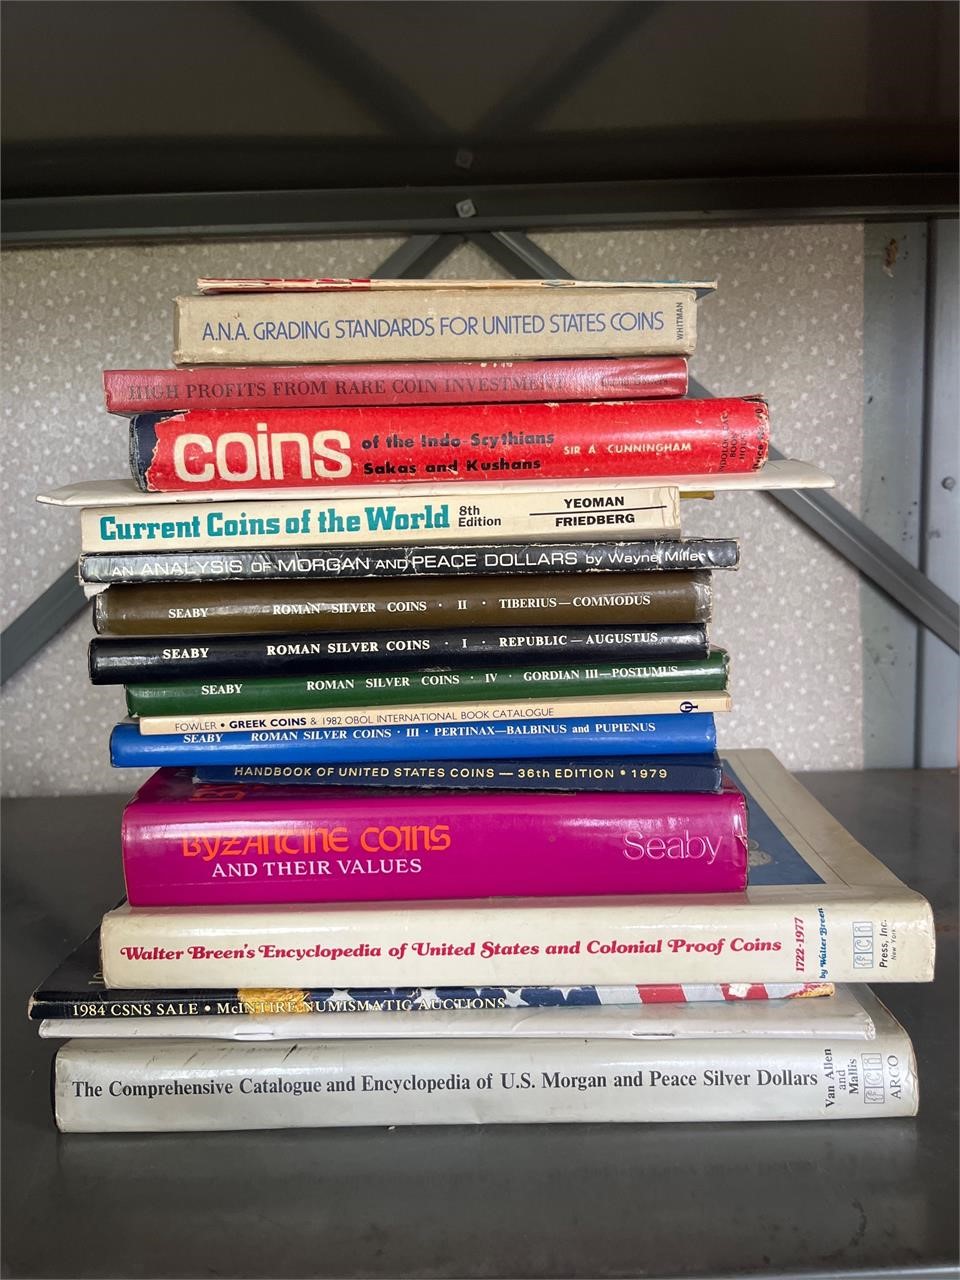 Coin books and other